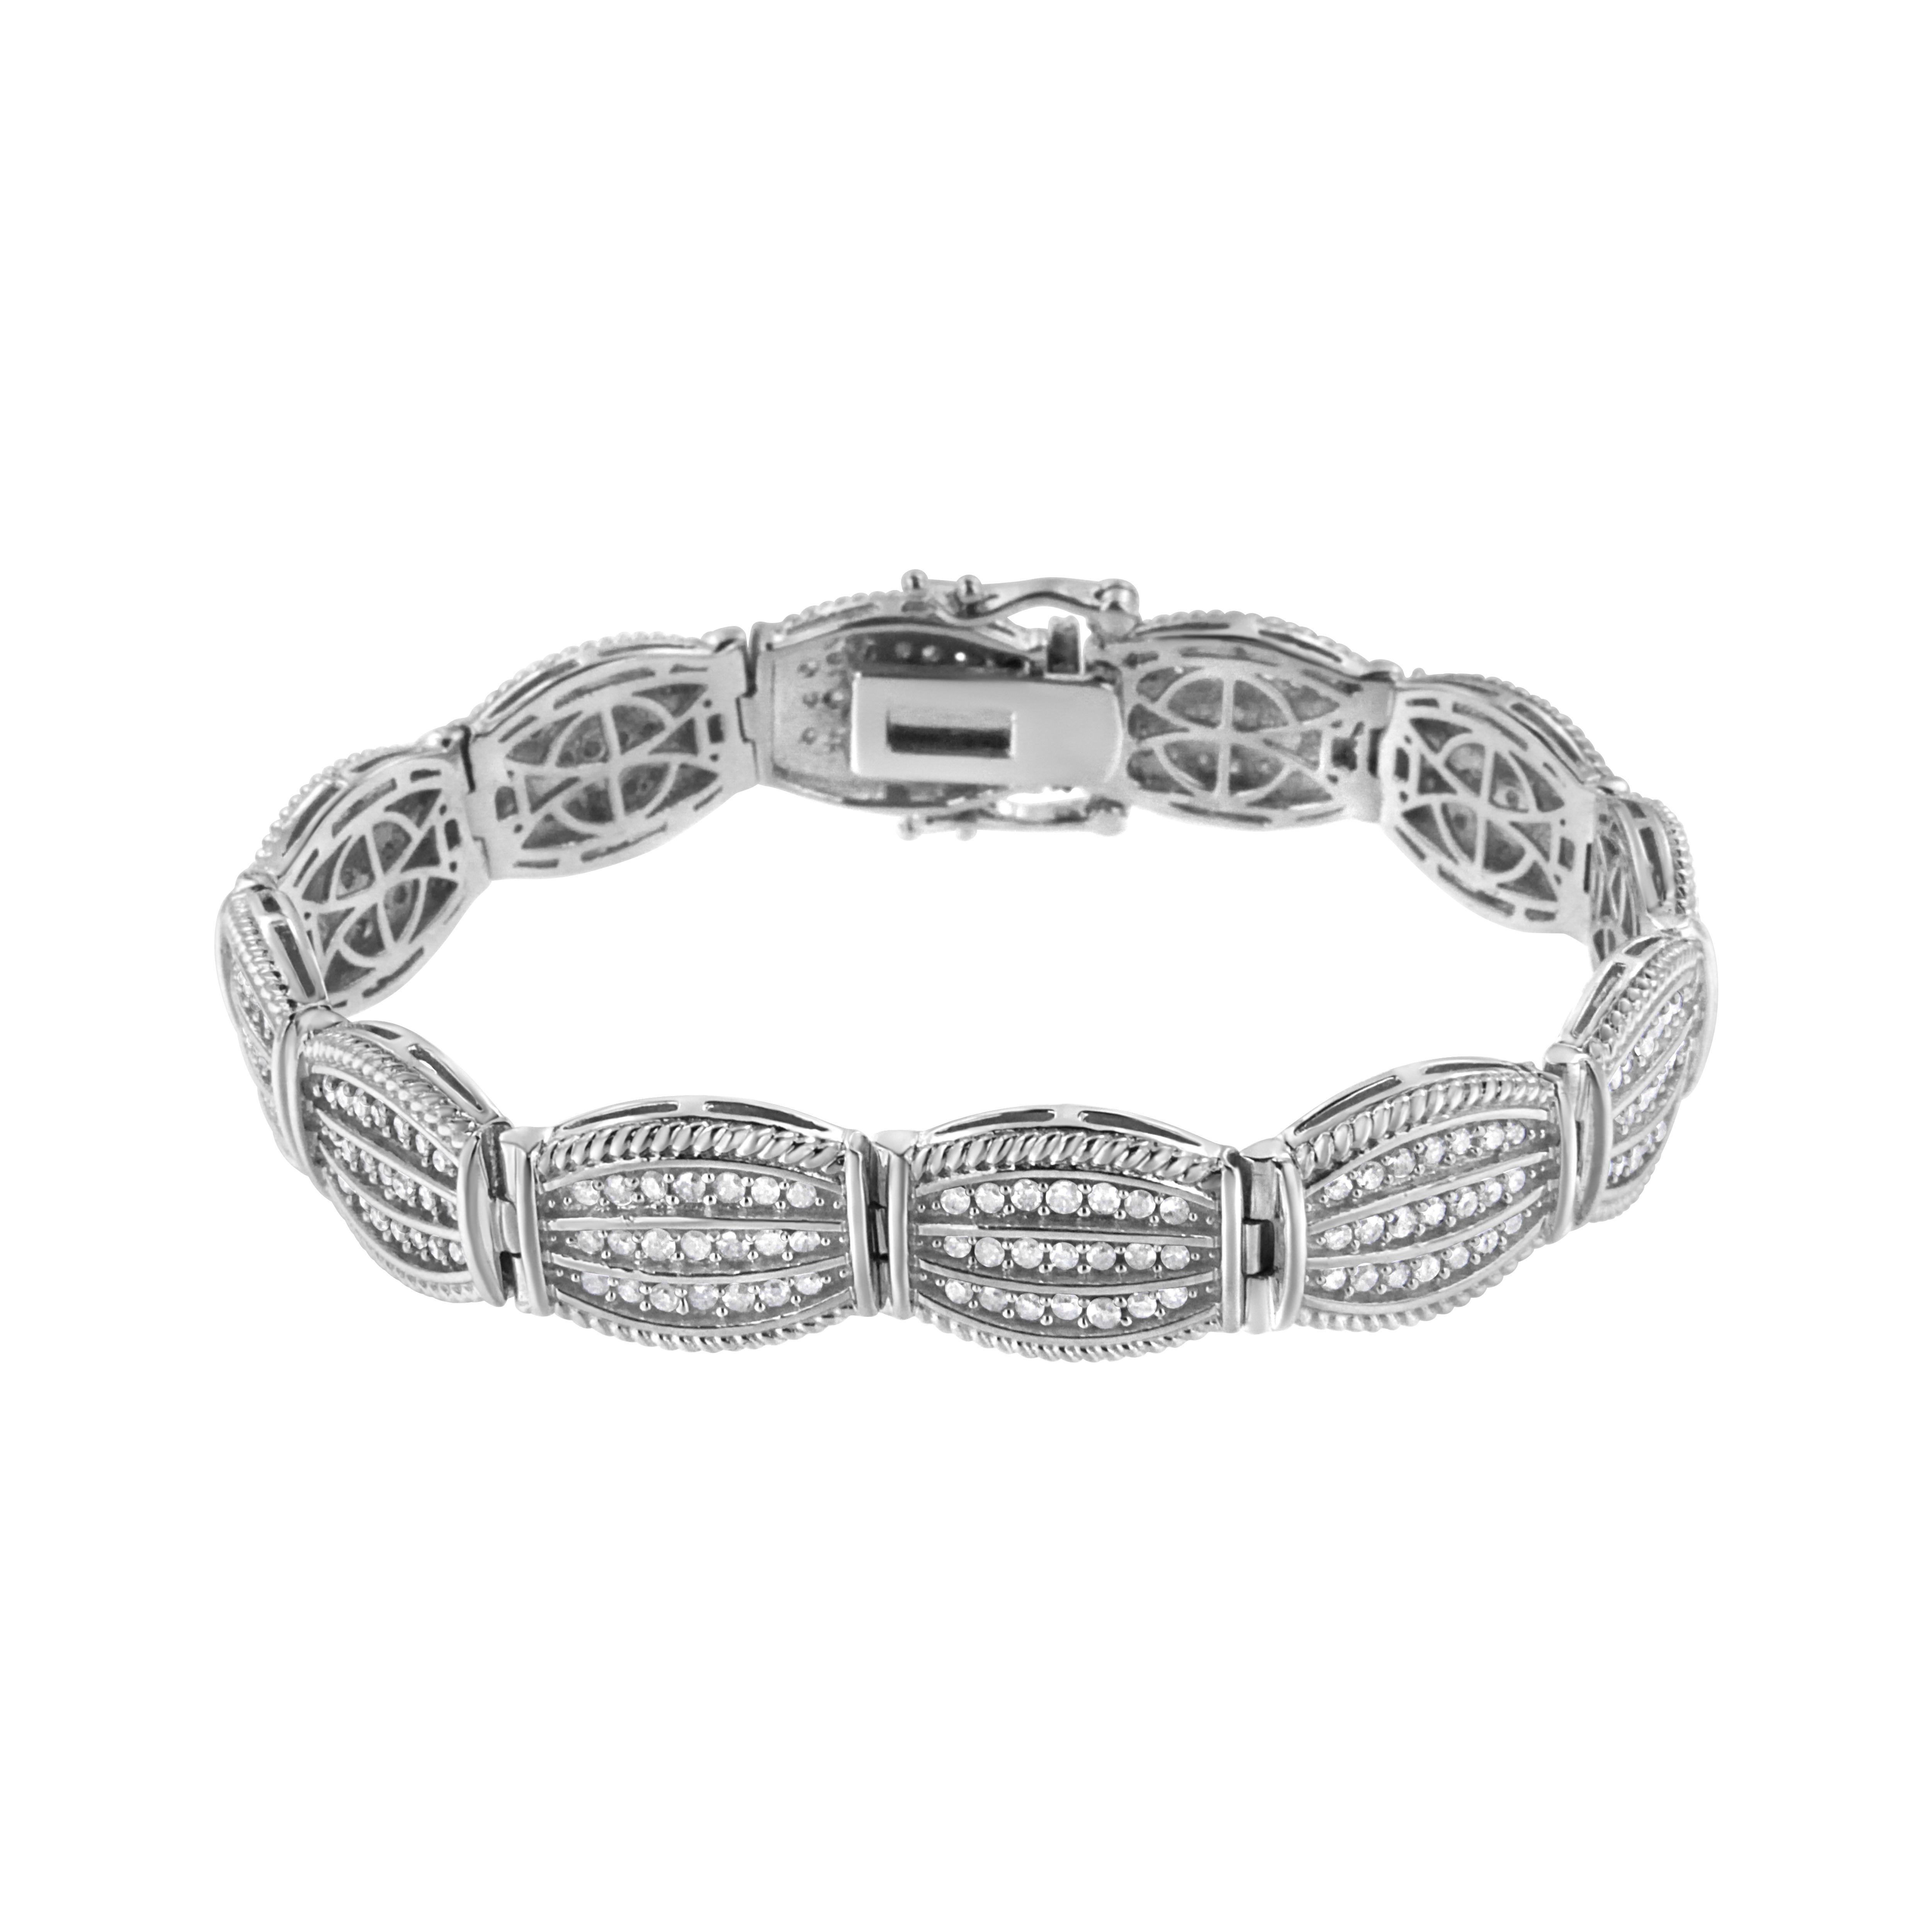 Uniquely designed, this silver tennis bracelet is unlike anything you've come across. Three rows of natural, round-cut diamonds sparkle in art deco style links that give the piece a striking look. This authentic design is crafted of real 92.5%